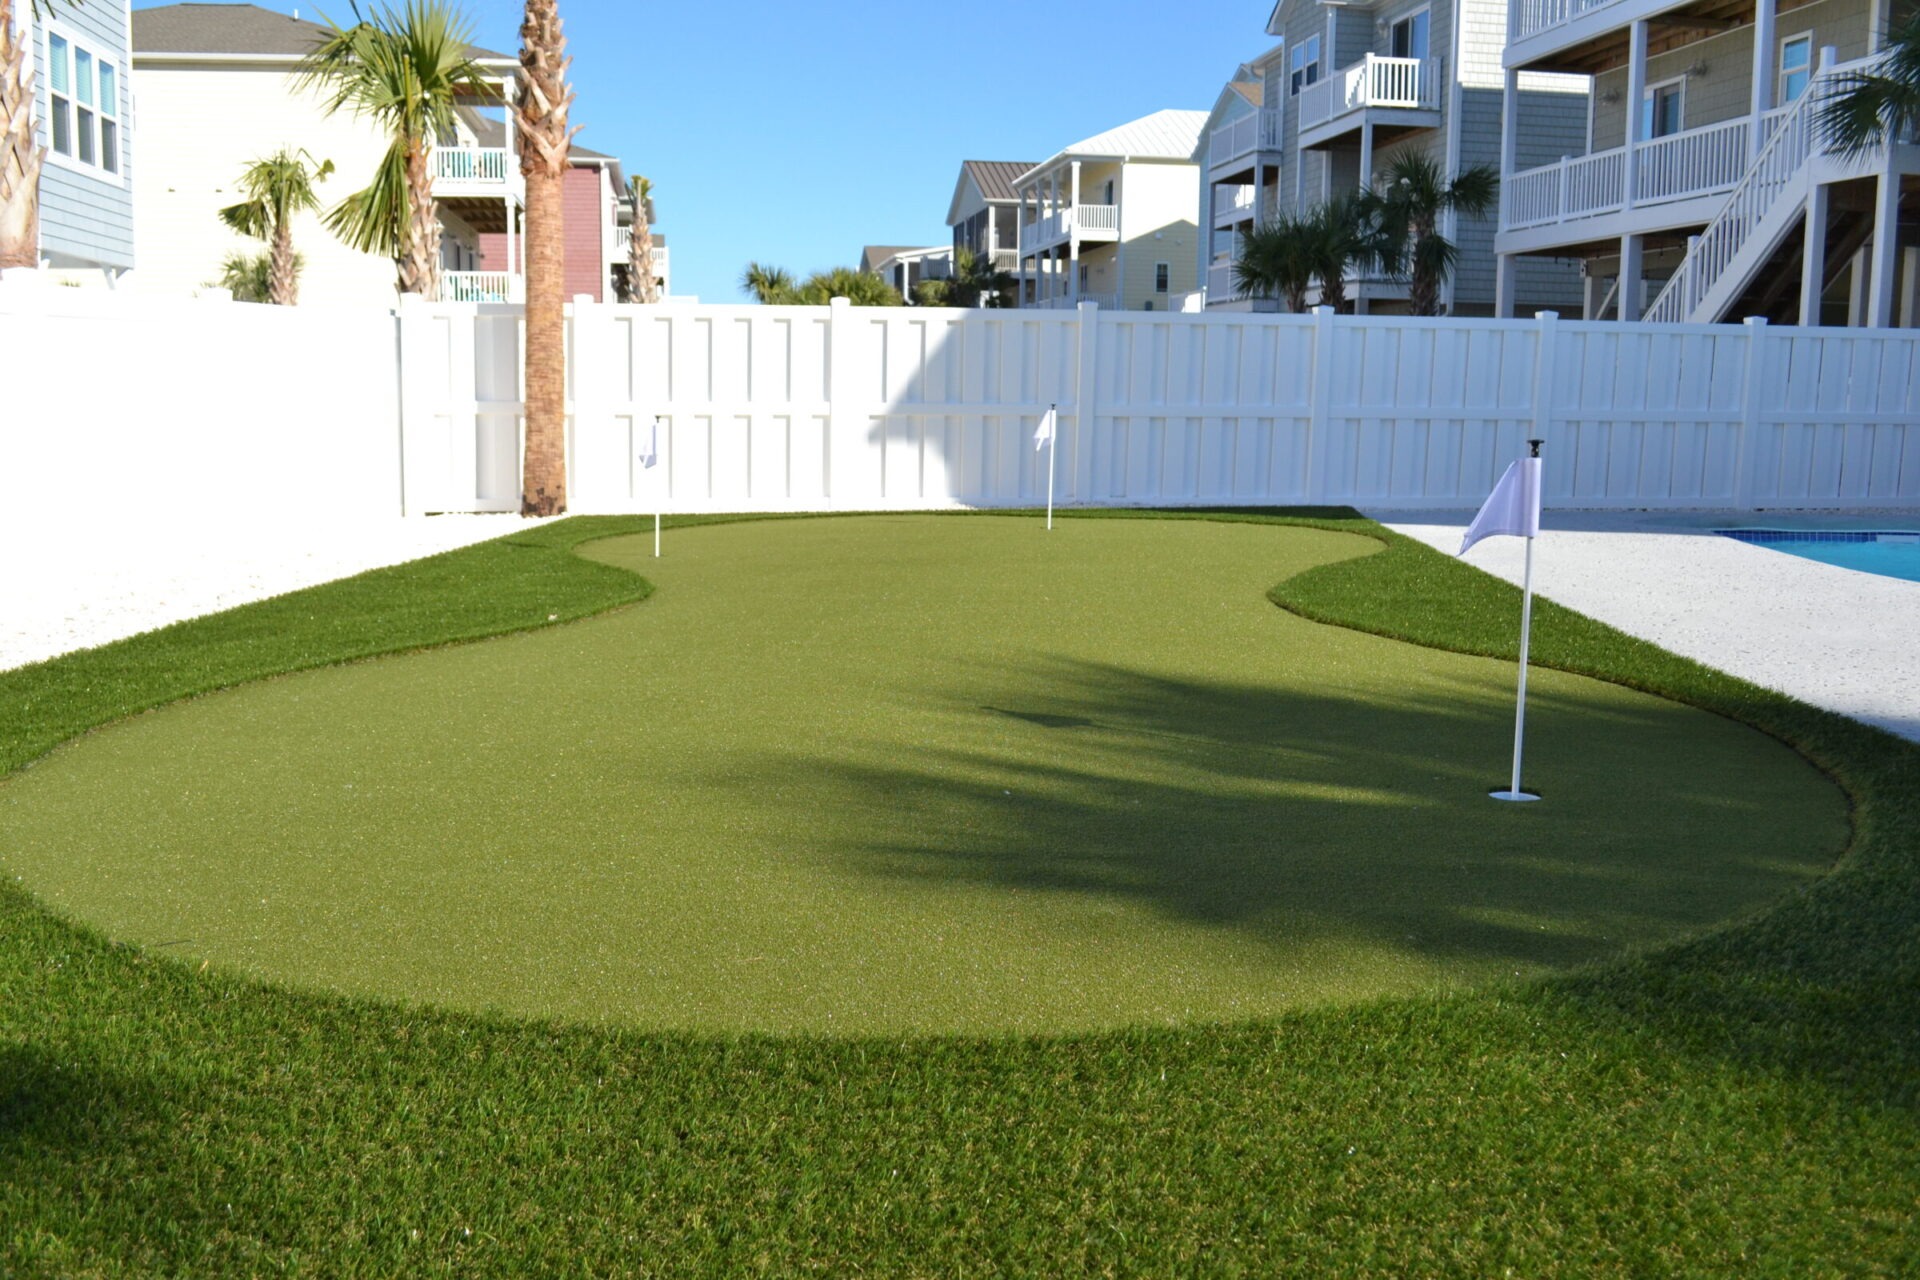 This image shows a small backyard putting green with artificial turf, white sand trap, two flags, surrounded by a white fence and palm trees.